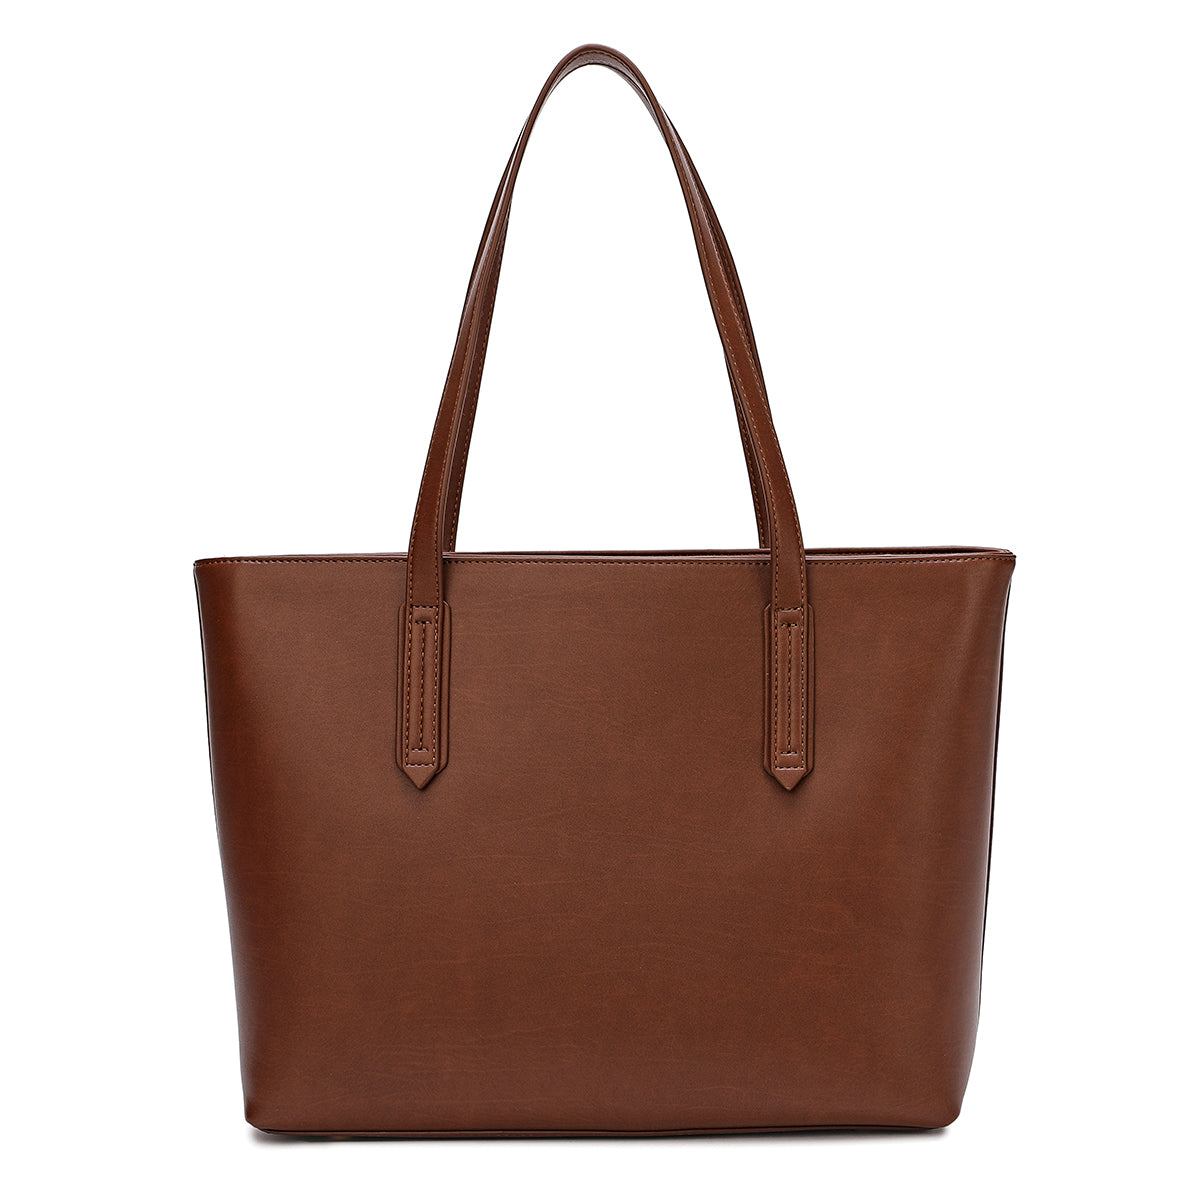 A spacious and practical handbag with a sophisticated design and several colors